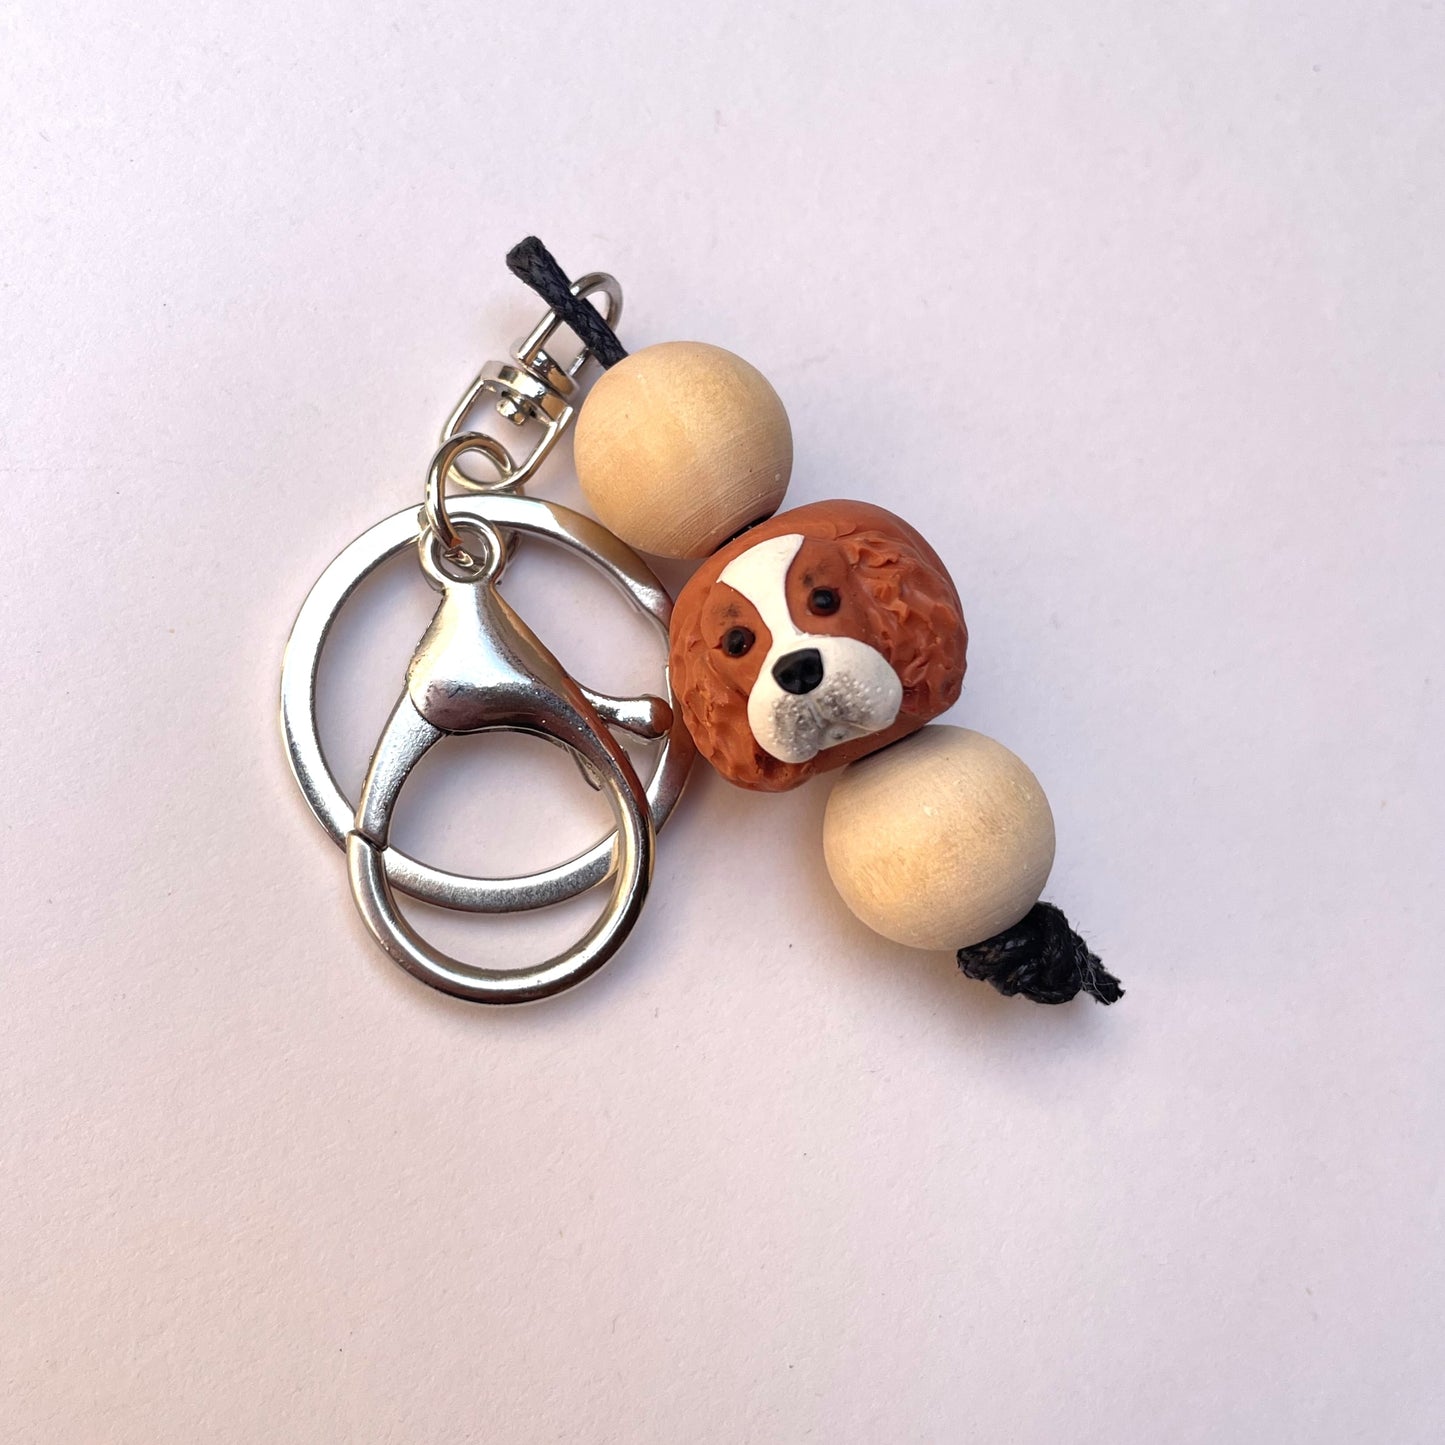 Polymer clay and timber handmade cavalier king charles spaniel dog keyrings on white background